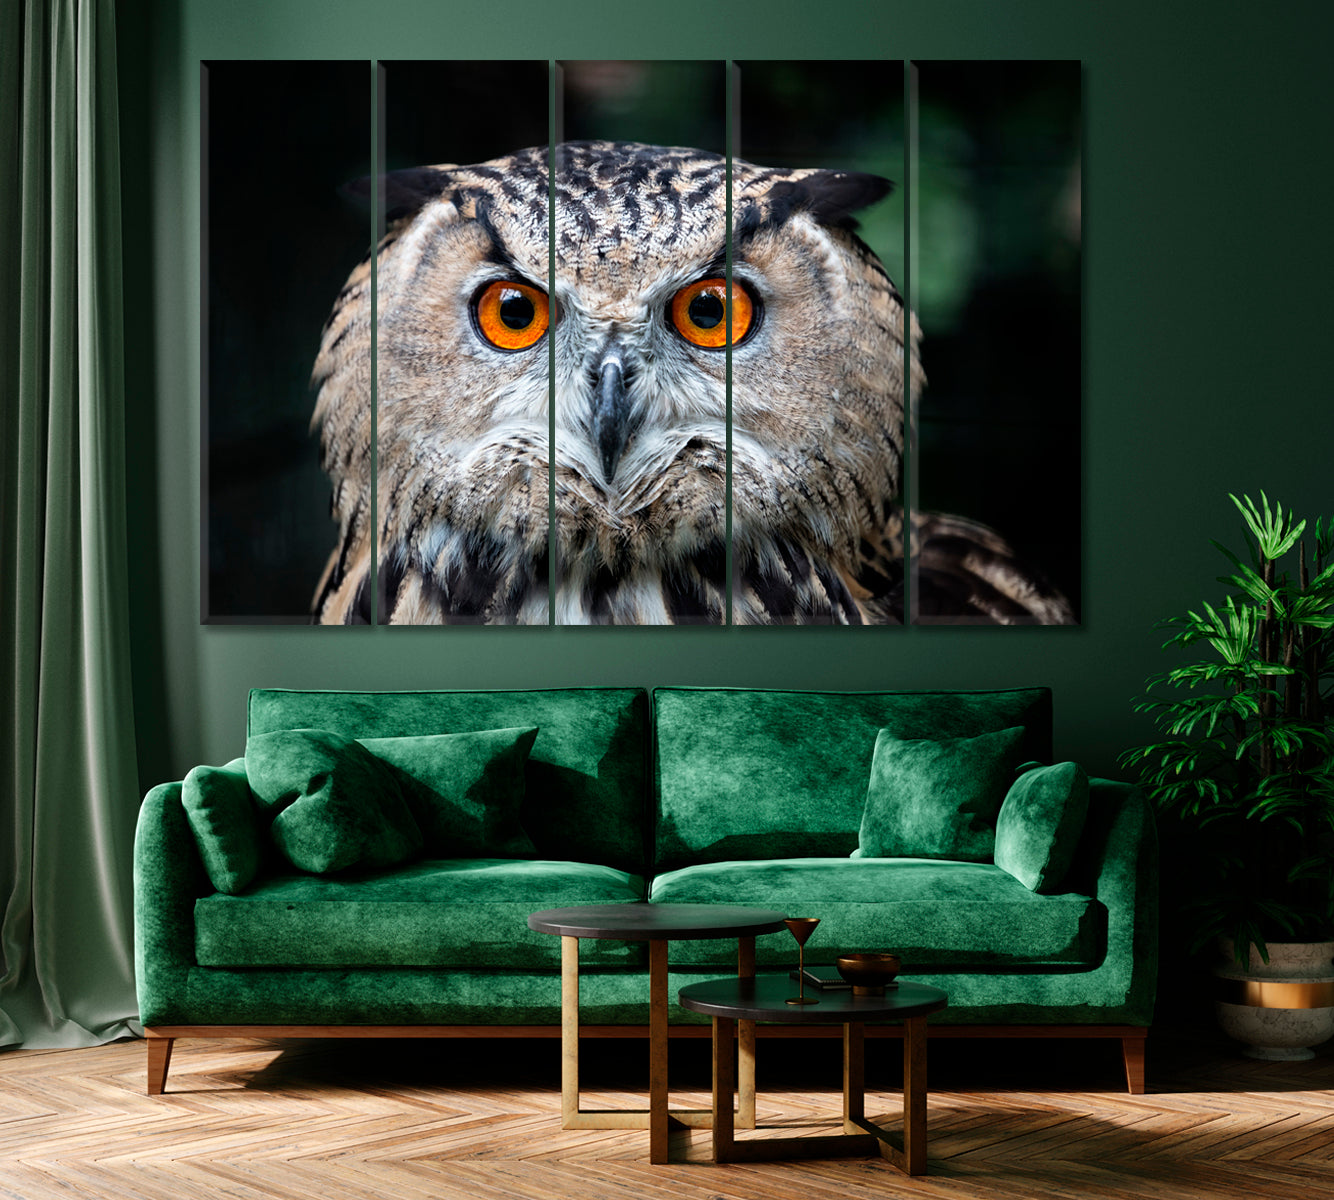 Owl with Orange Eyes Canvas Print ArtLexy 5 Panels 36"x24" inches 